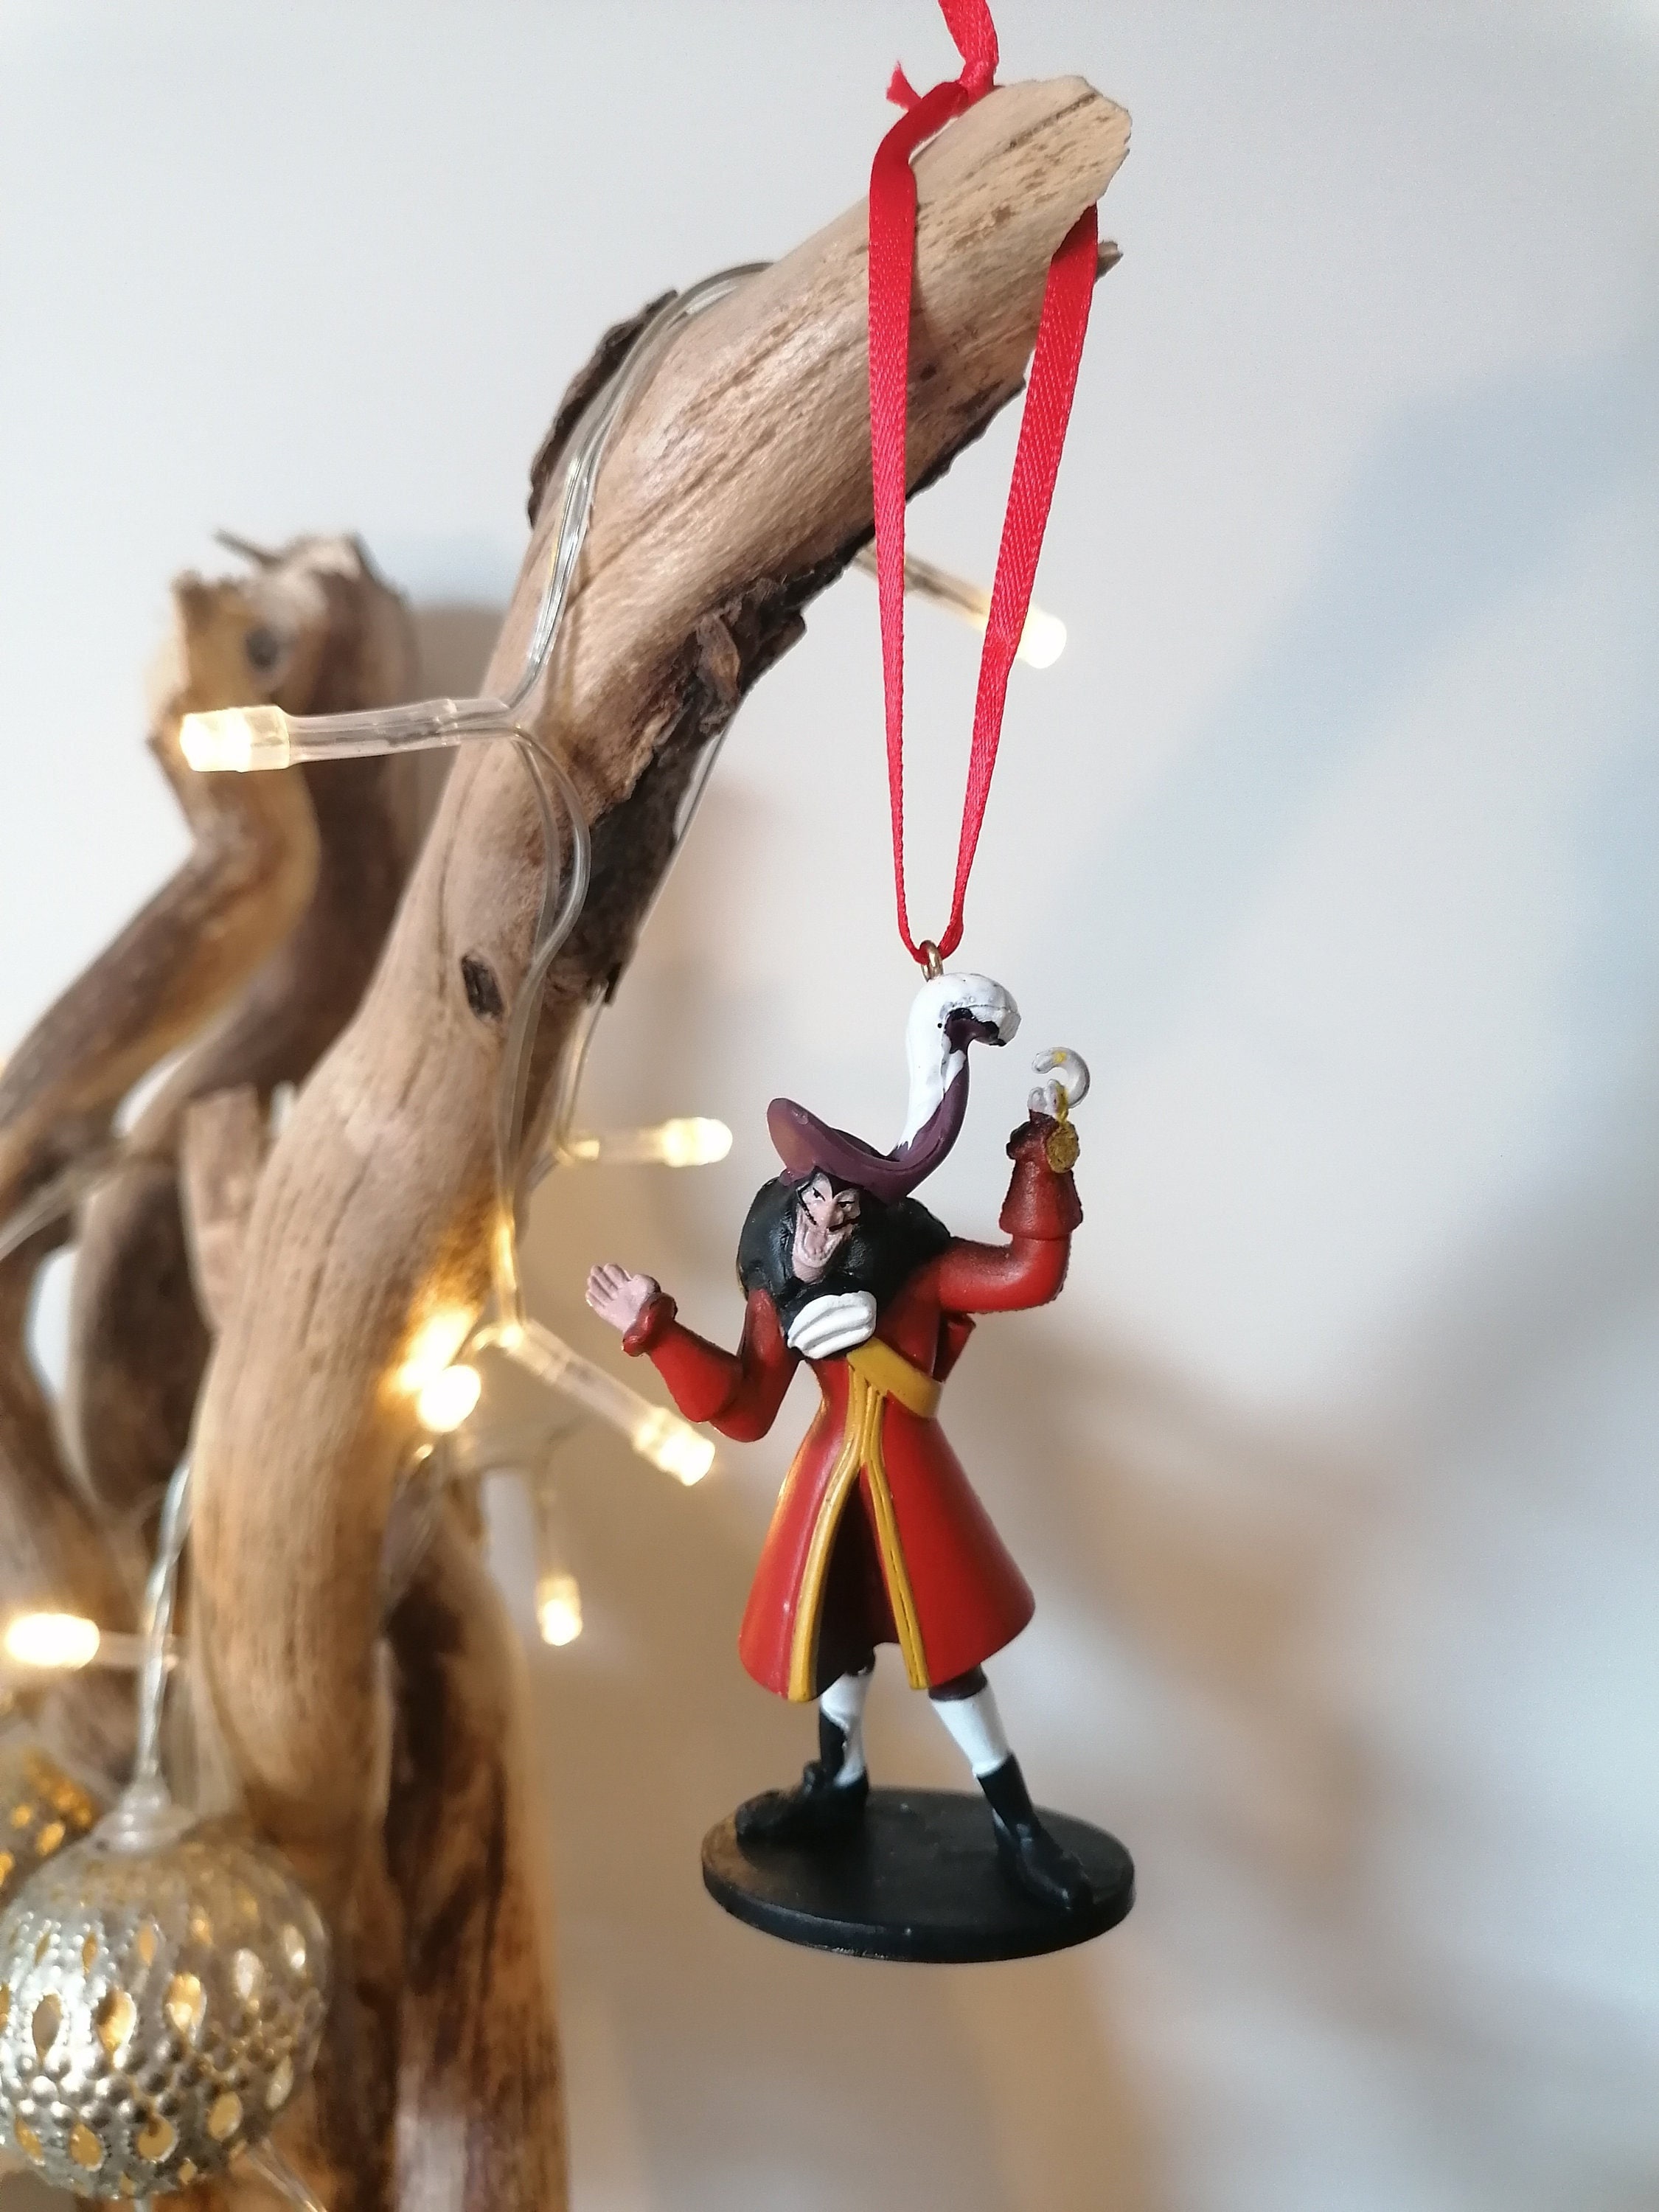 Disney Peter Pan Captain Hook Christmas Decoration Figure, Hanging Ornament  Bauble, Disney Christmas Decorations, Gifts for Her -  Canada